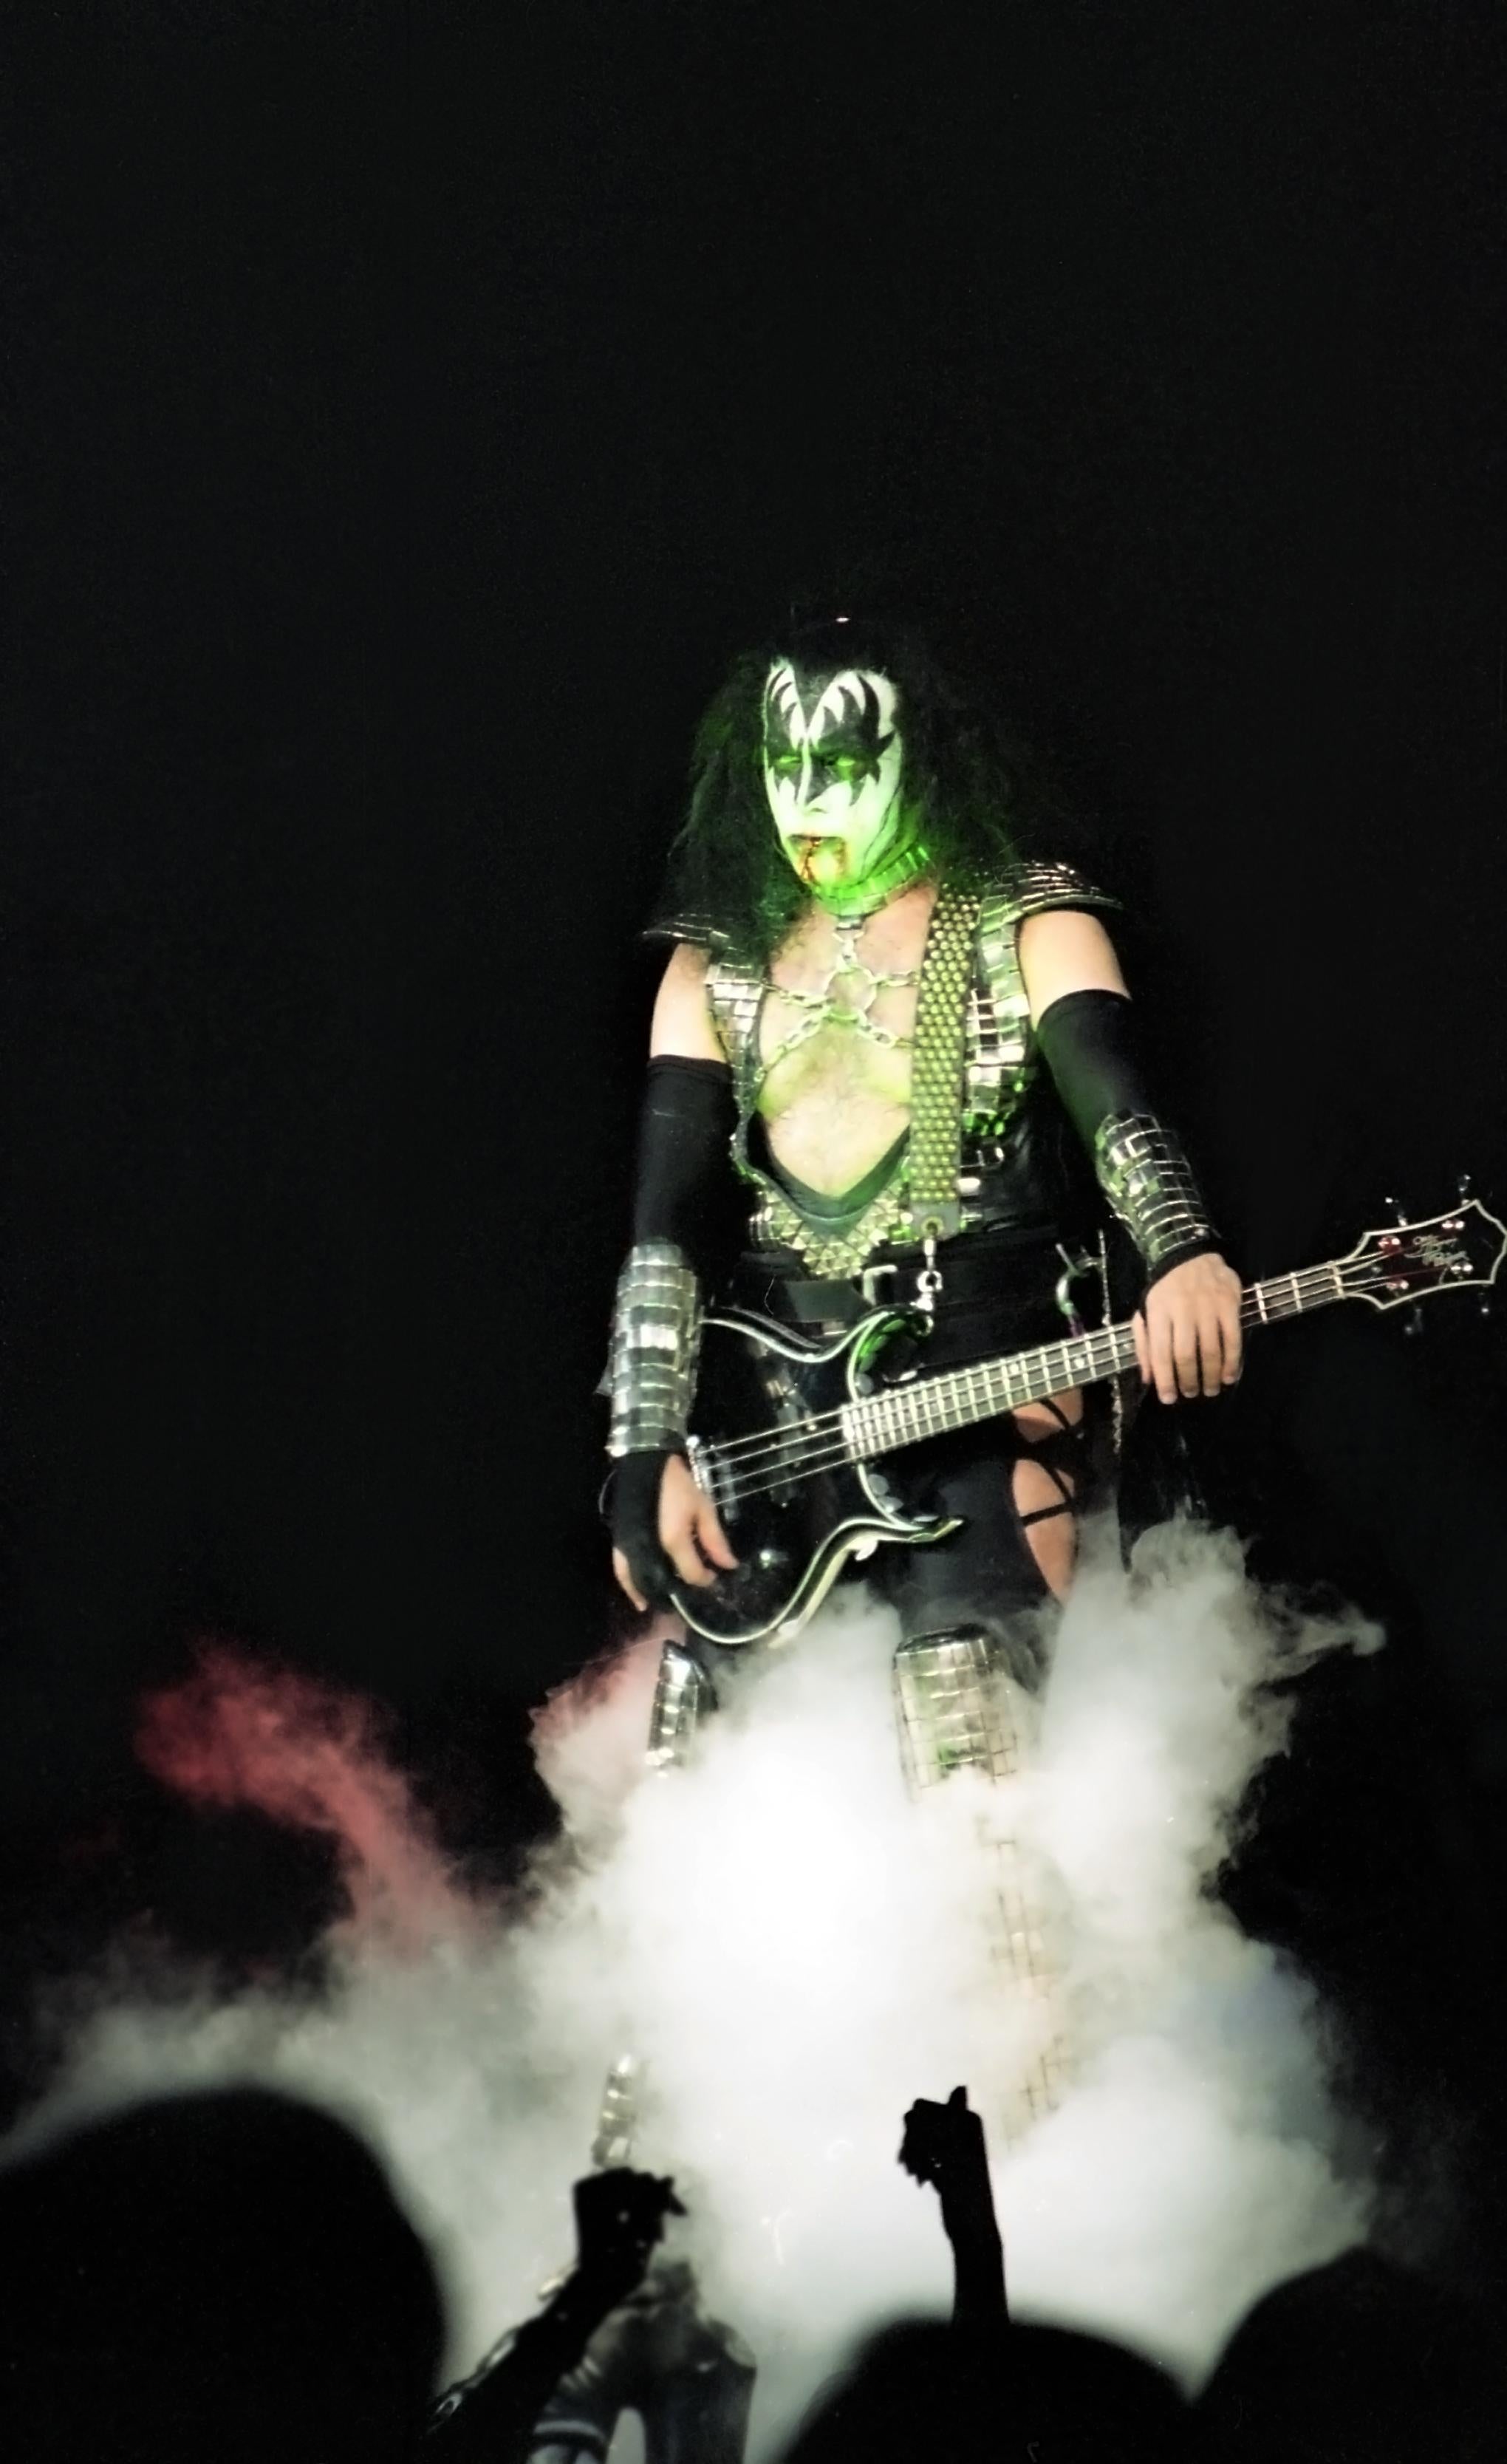 Tony Defilippis Color Photograph - Gene Simmons of KISS Singing on Stage Fine Art Print